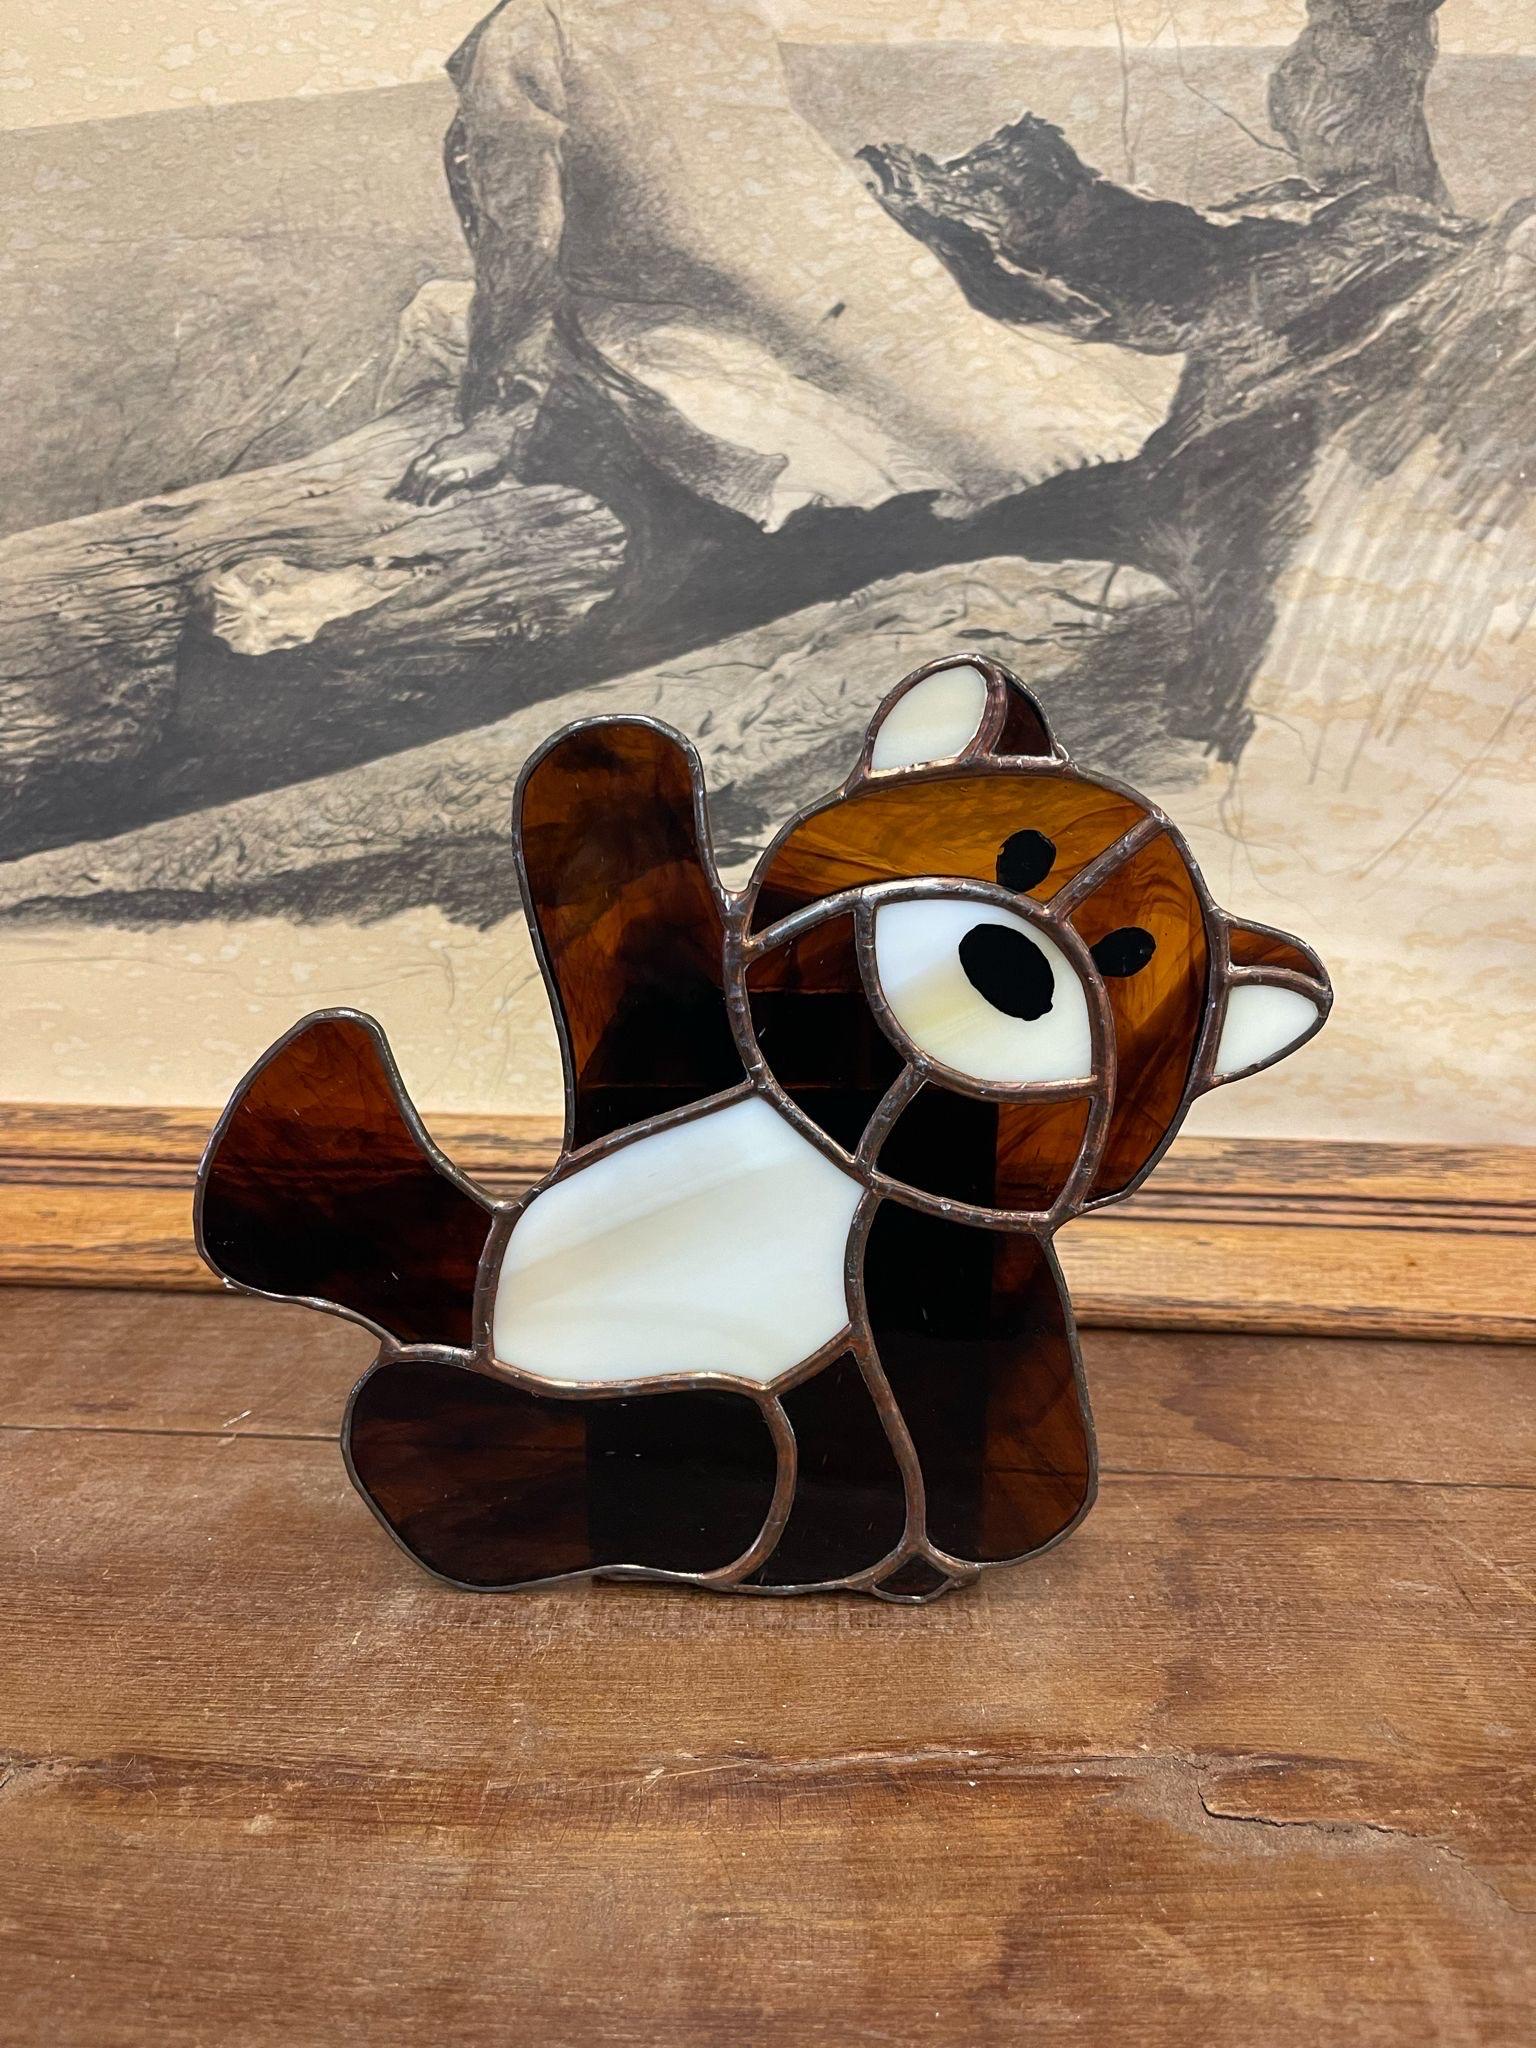 Unique Stained Glass Decor, this Teddy Bear has a Stained glass Cup attached to the Back. Could be Used as a Plant Holder or for Styling Purposes.

Dimensions. 5 W ; 6 D ; 7 H